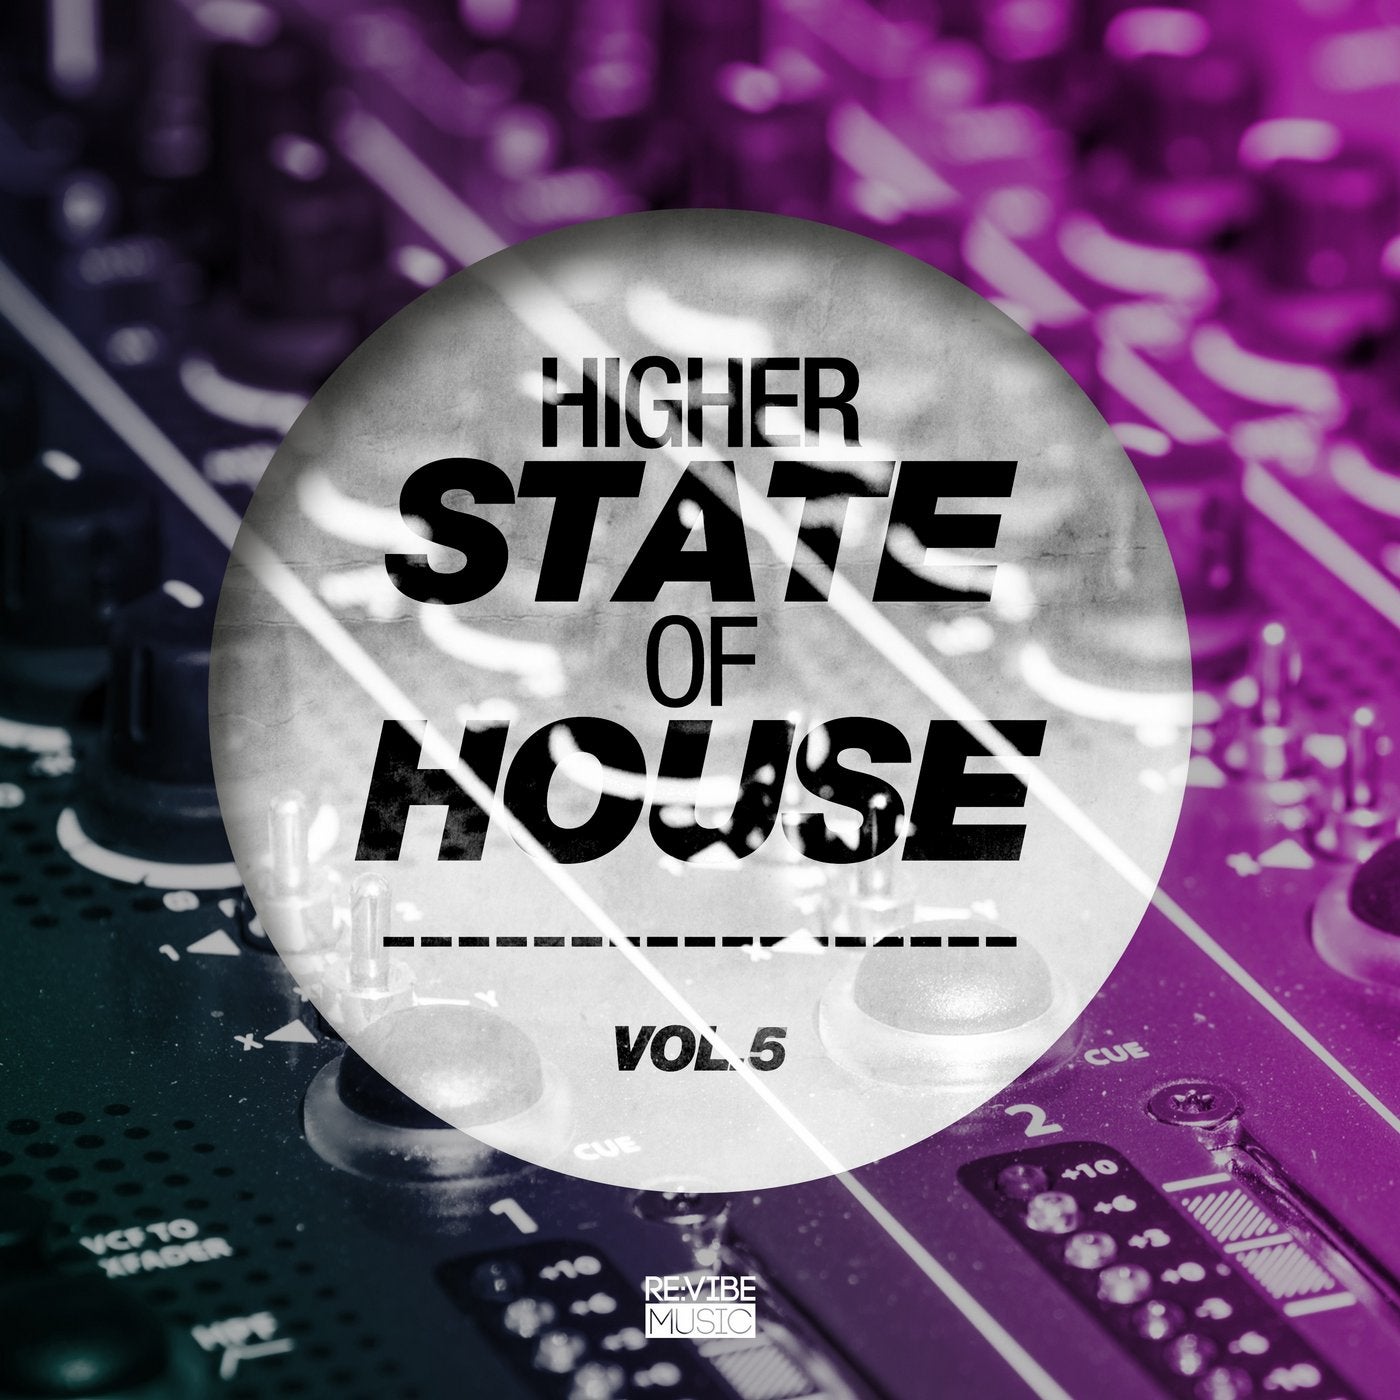 Higher State of House, Vol. 6